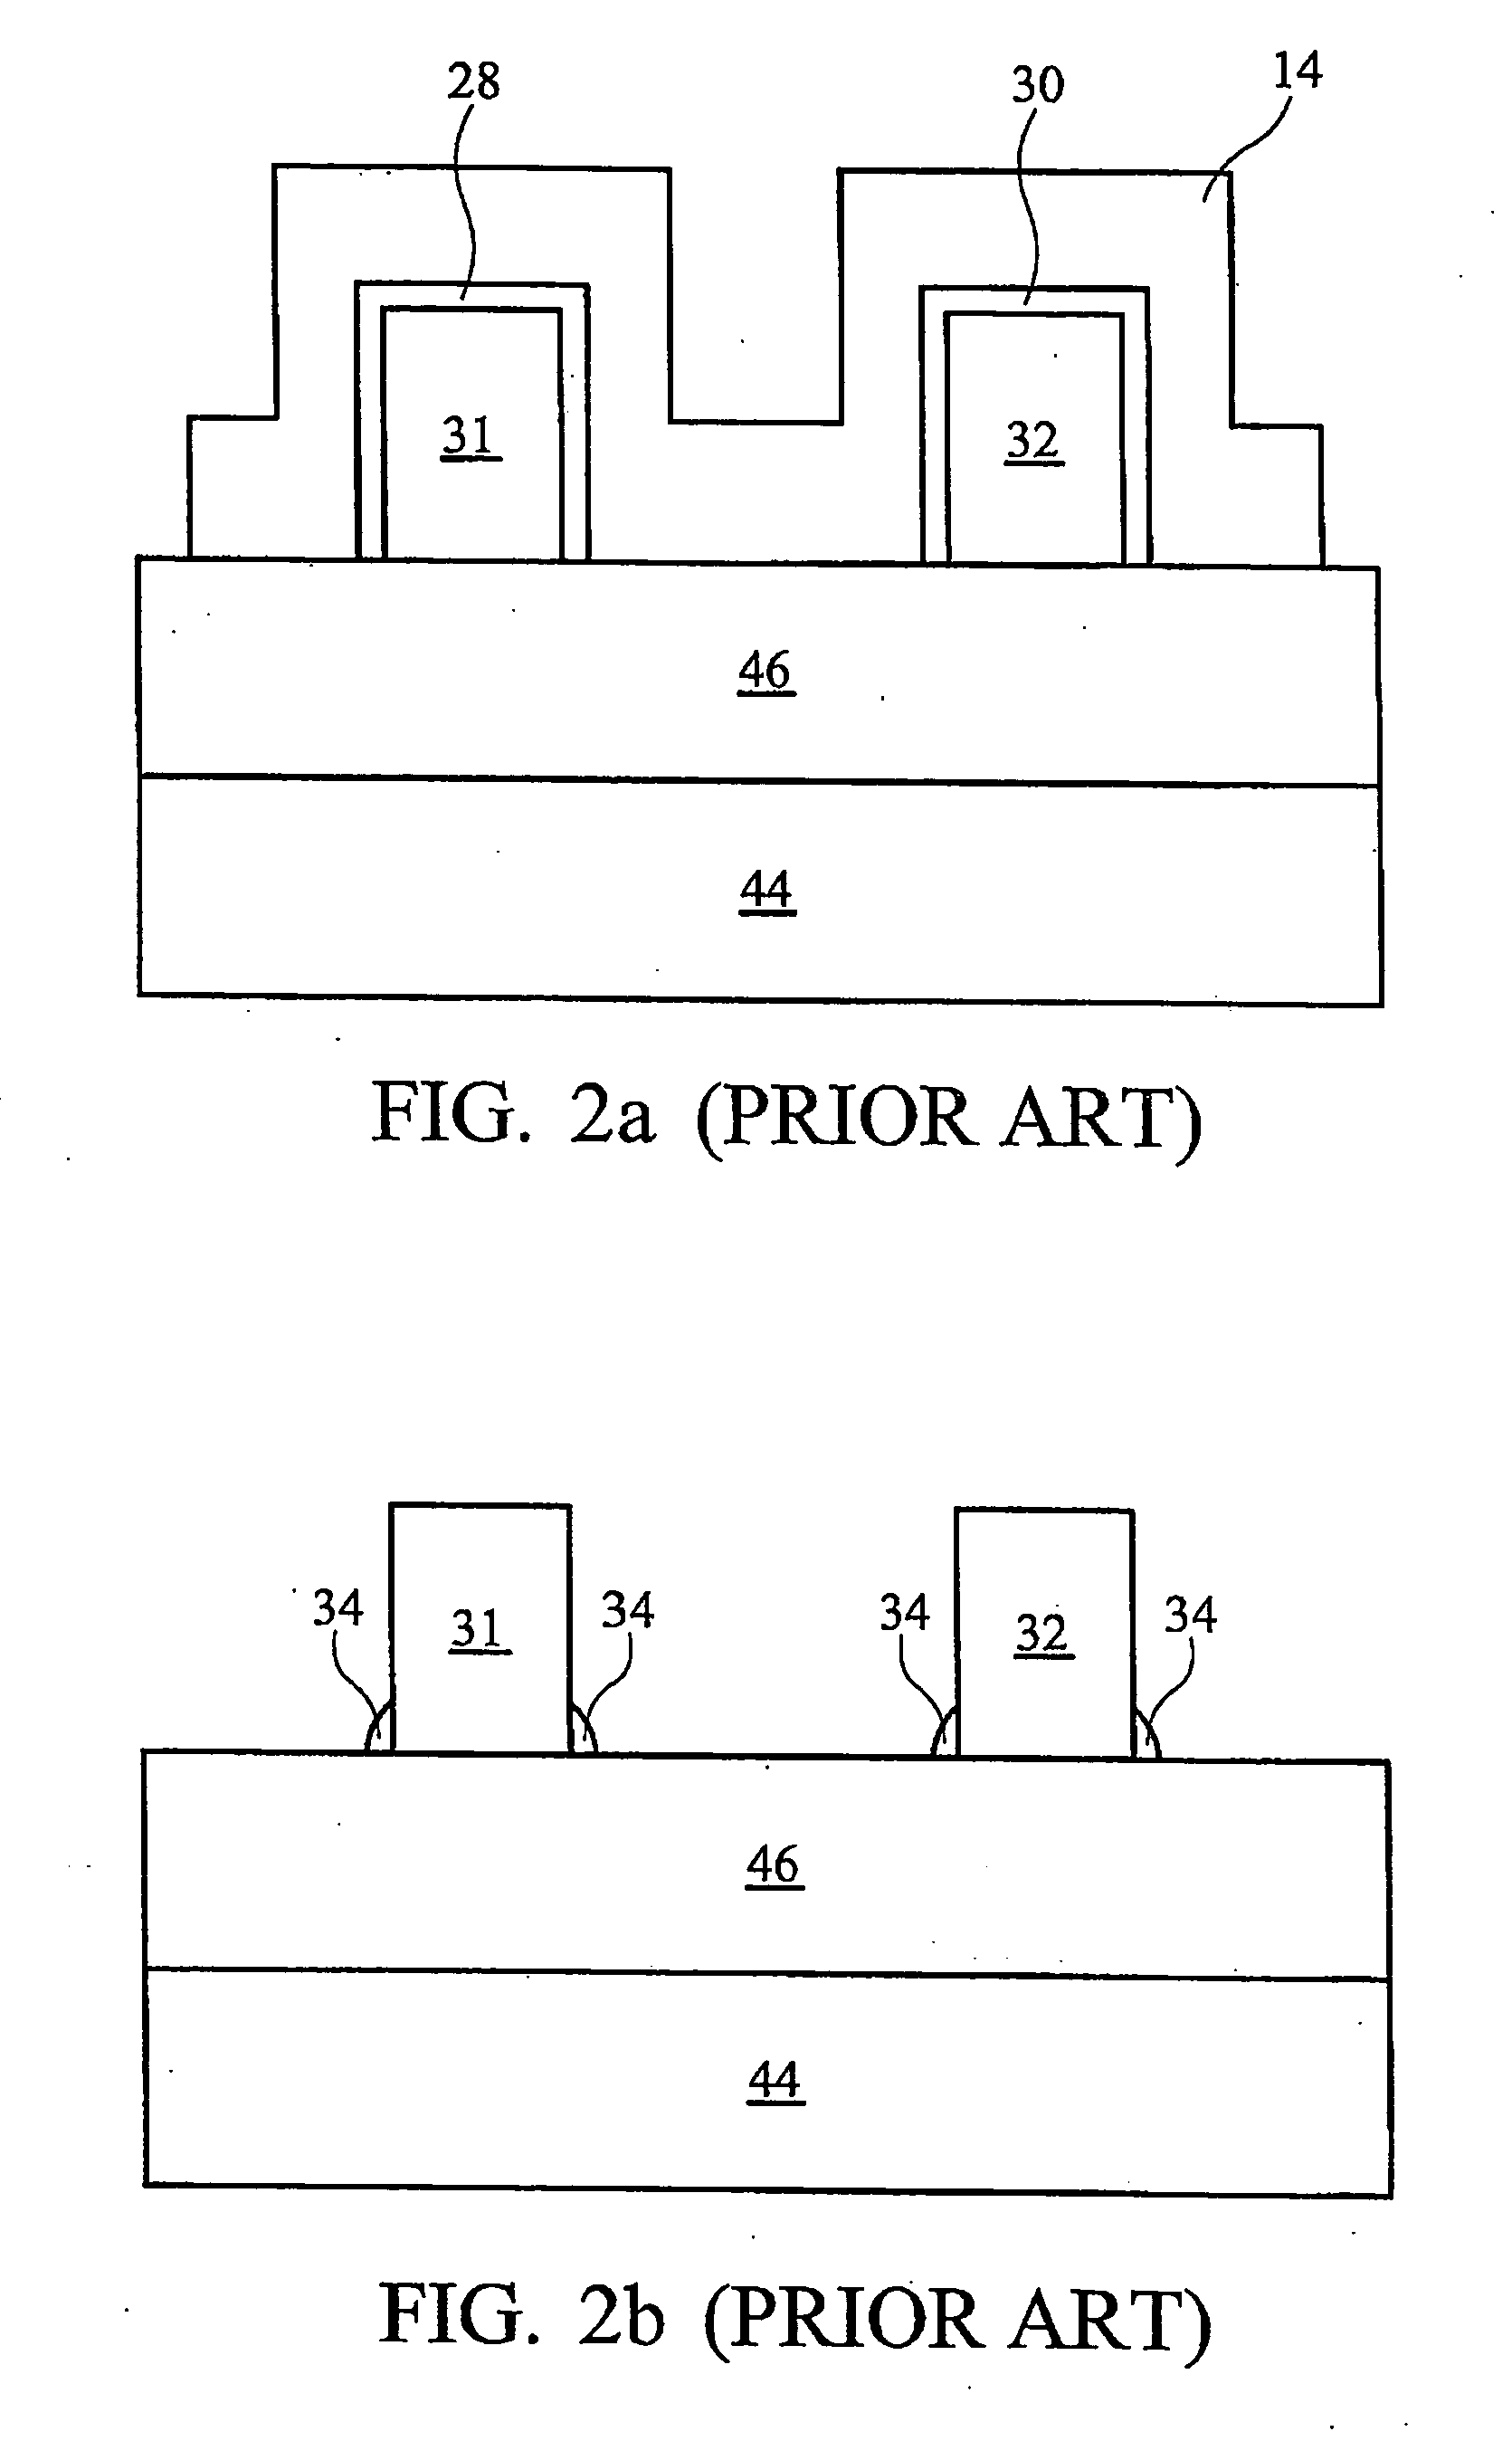 Apparatus and method for multiple-gate semiconductor device with angled sidewalls